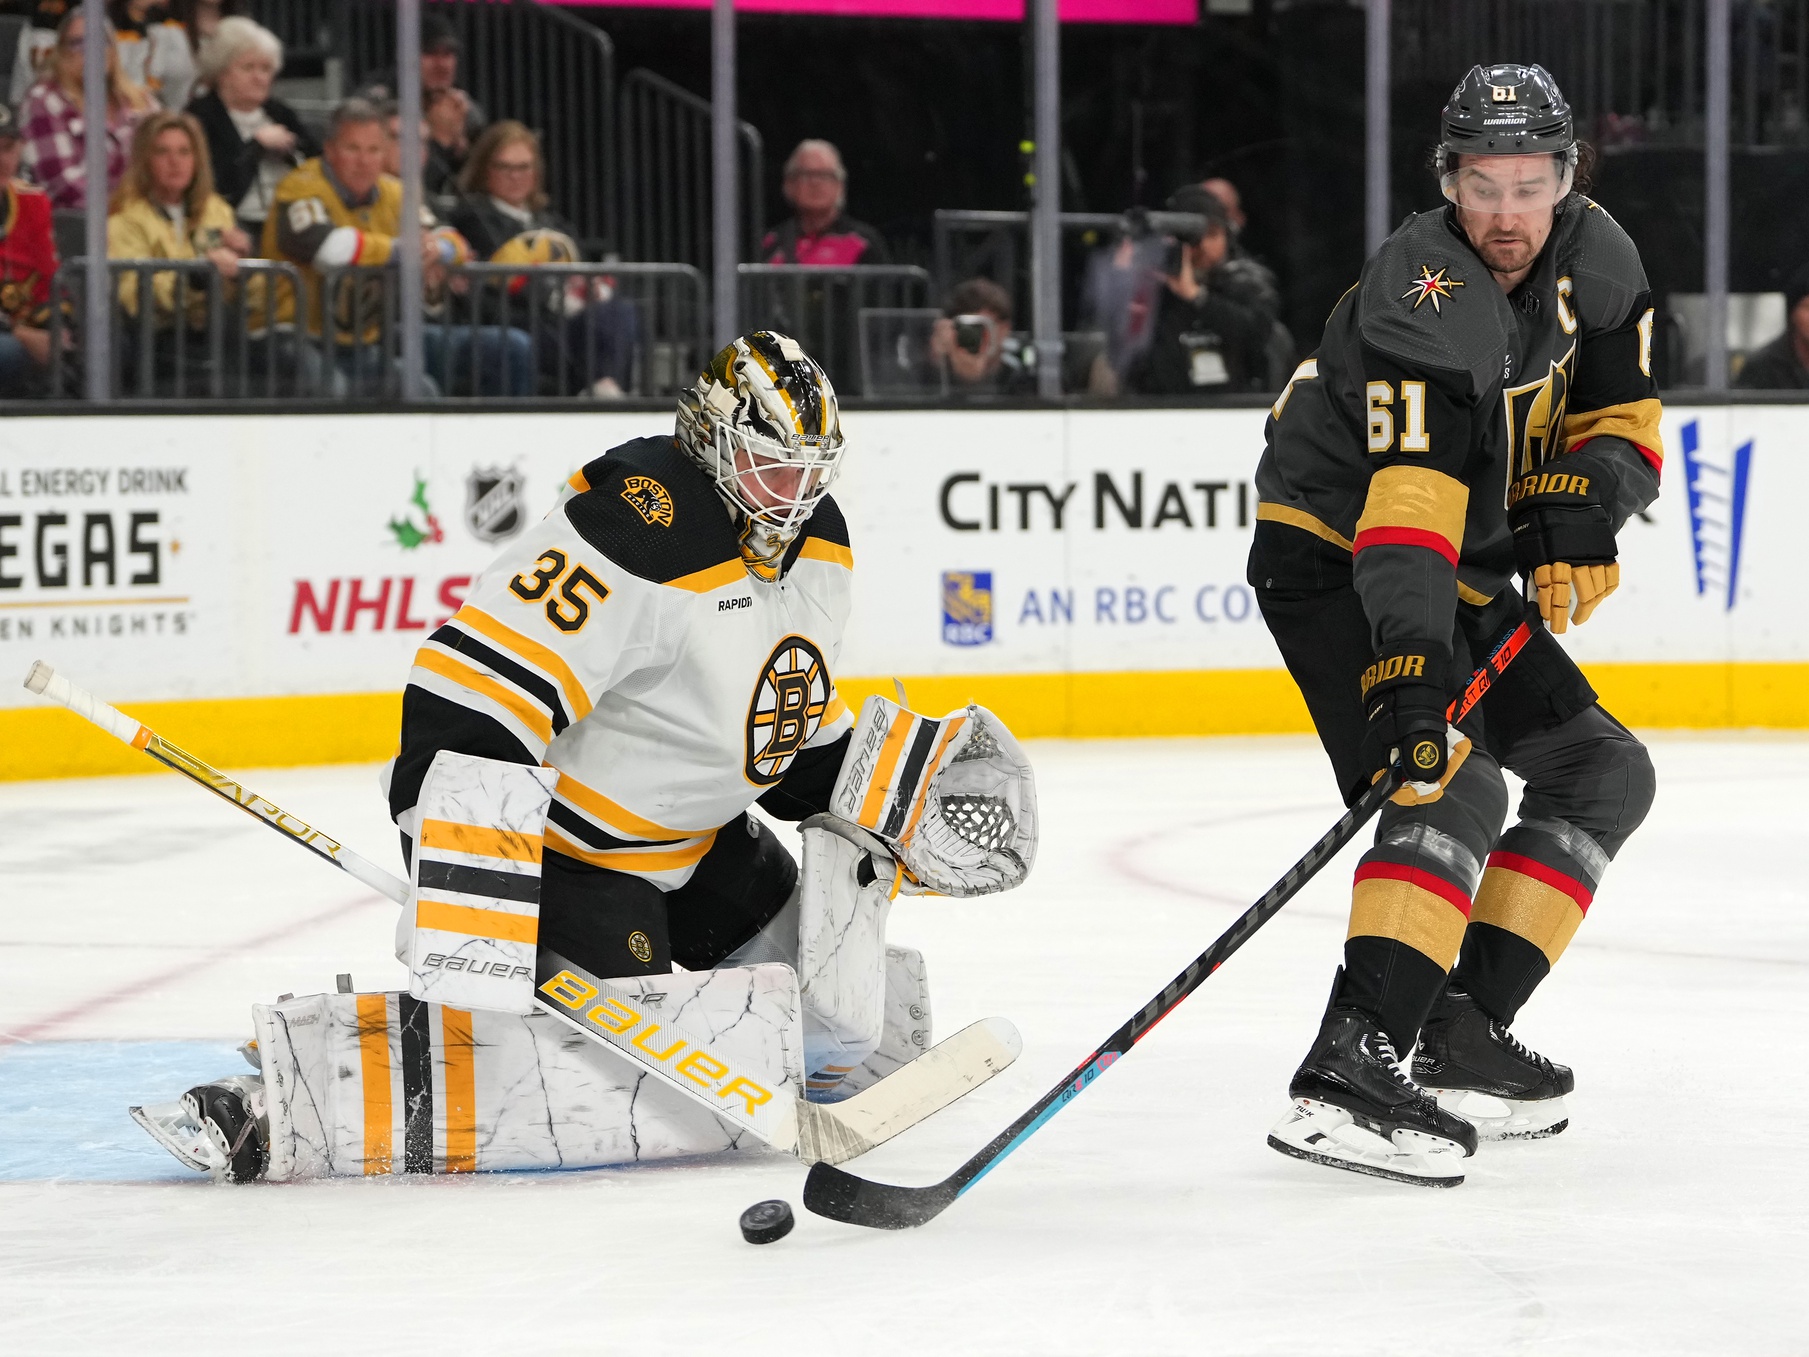 Dec 11, 2022; Las Vegas, Nevada, USA; Vegas Golden Knights right wing Mark Stone (61) deflects a pass wide of Boston Bruins goaltender Linus Ullmark (35) during the second period at T-Mobile Arena. Mandatory Credit: Stephen R. Sylvanie/USA TODAY Sports